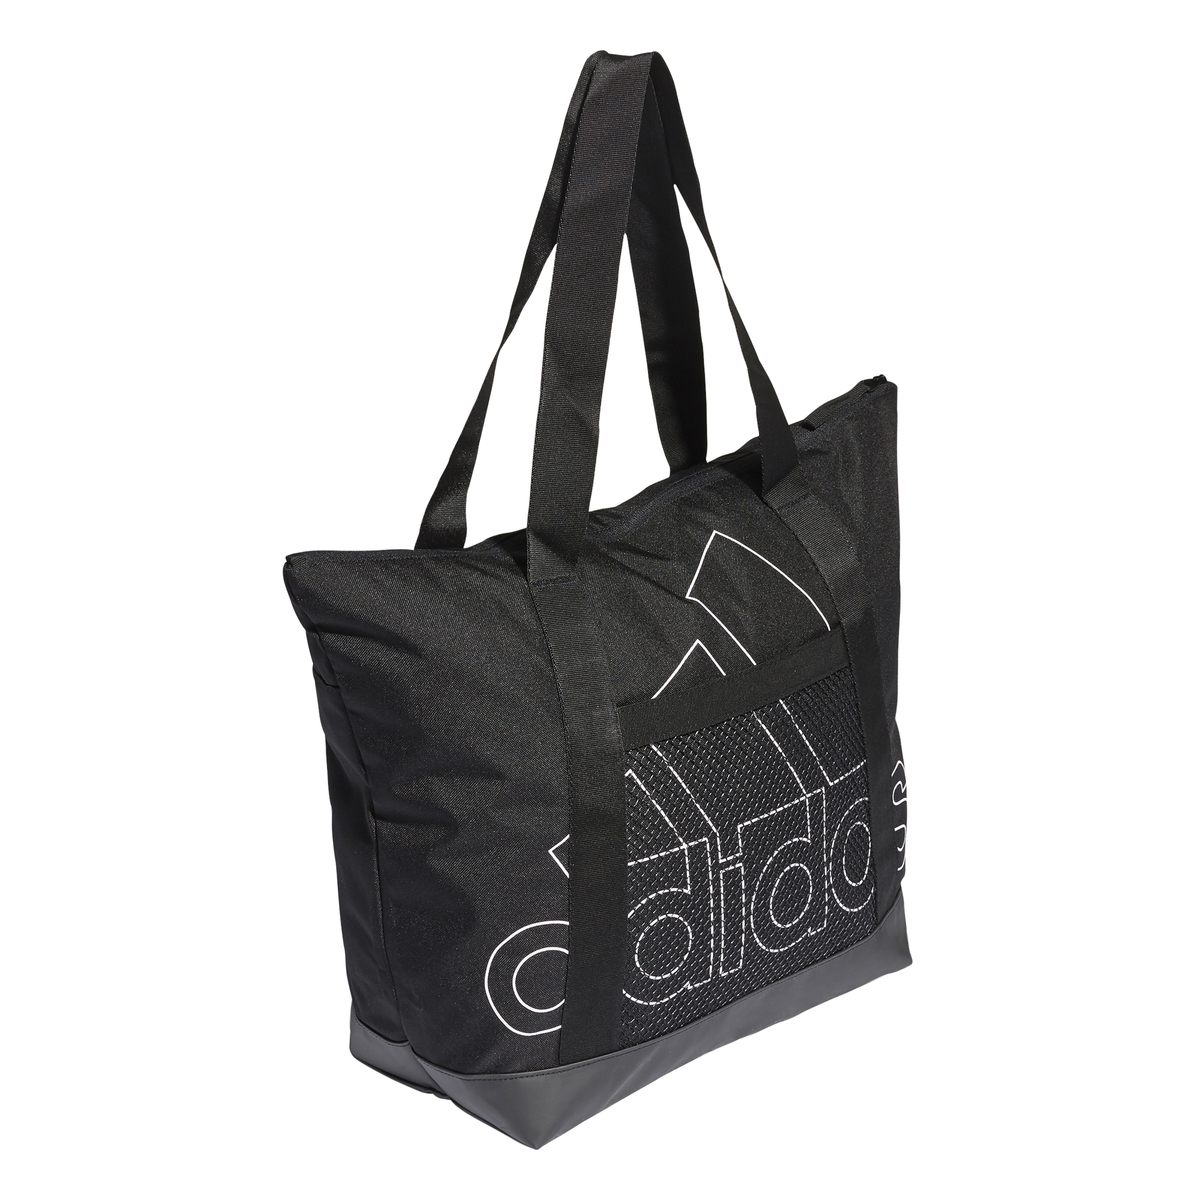 Bolso adidas Tote,  image number null